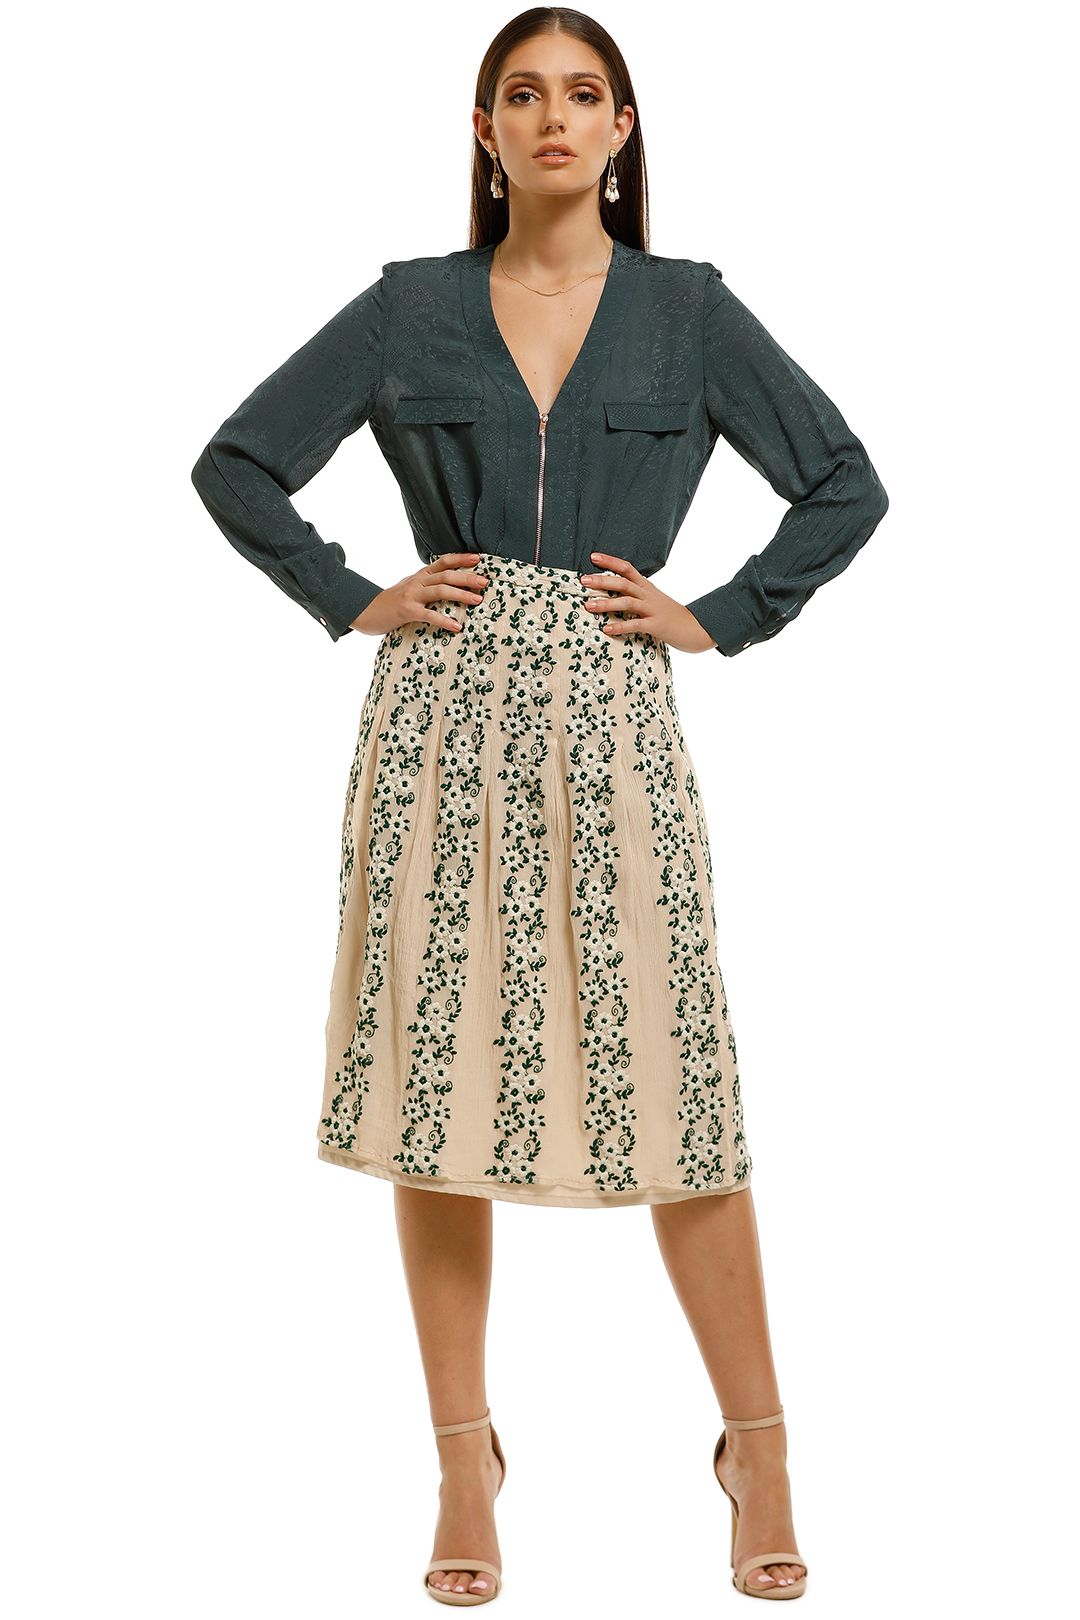 Moss-and-Spy-Daisy-Skirt-Embroidered-Floral-Front